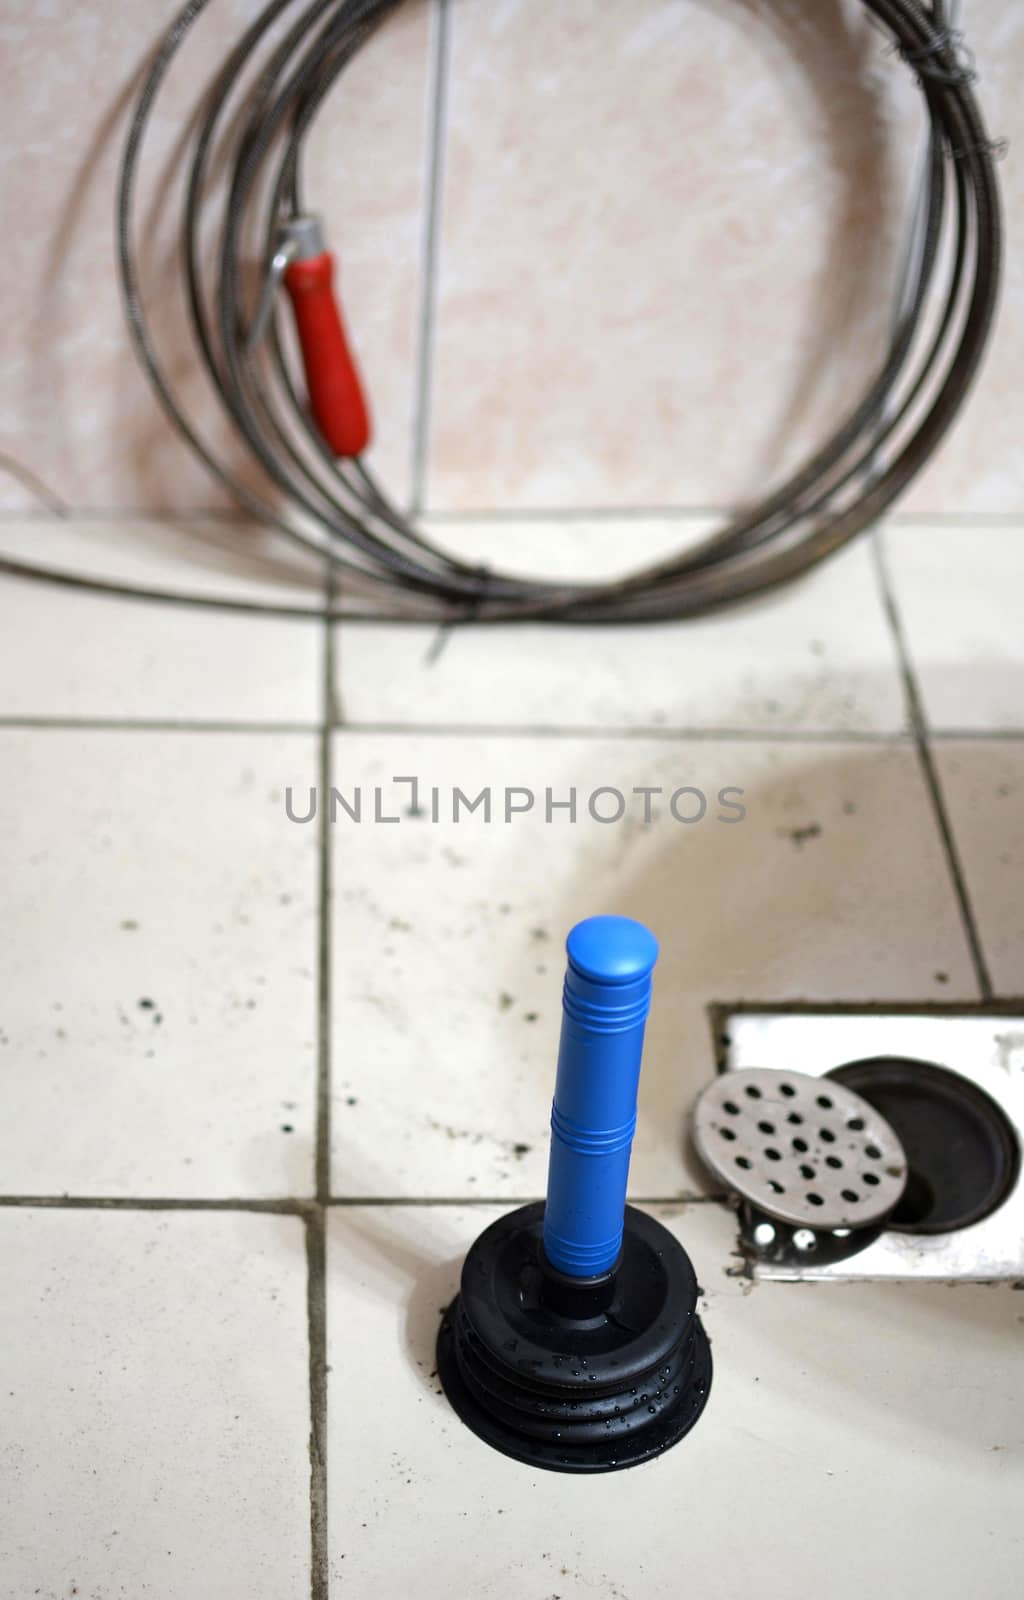 Plunger, some wires, and a clogged drain.